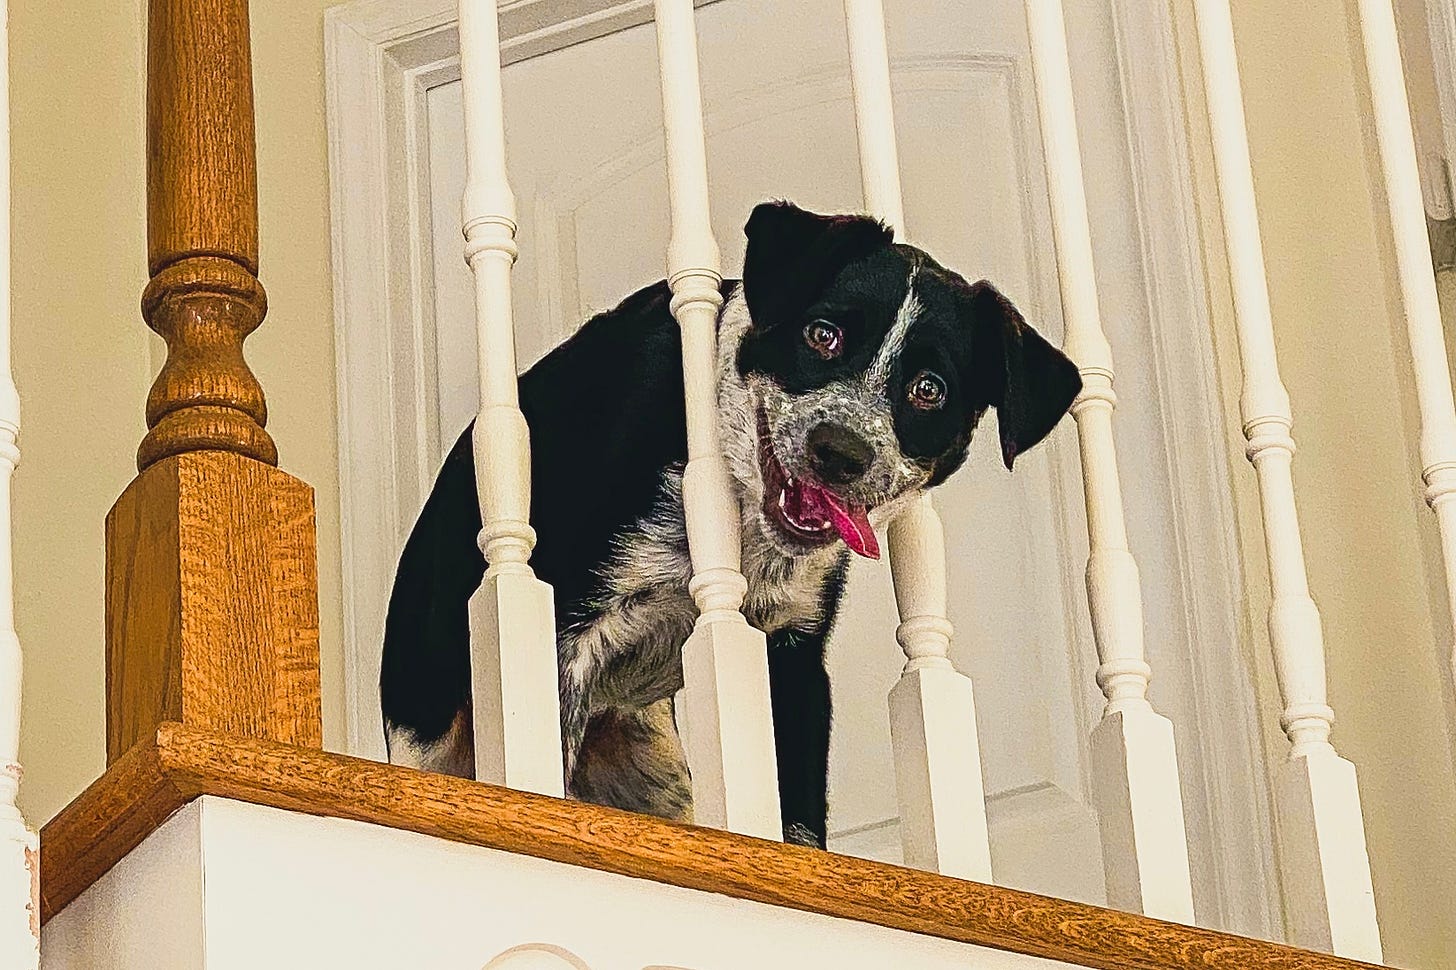 A mostly black Aussie shepherd/cattle dog mix peers down at you from the upstairs landing, head between posts, tongue hanging out the side of his mouth with a goofy expression on his face.